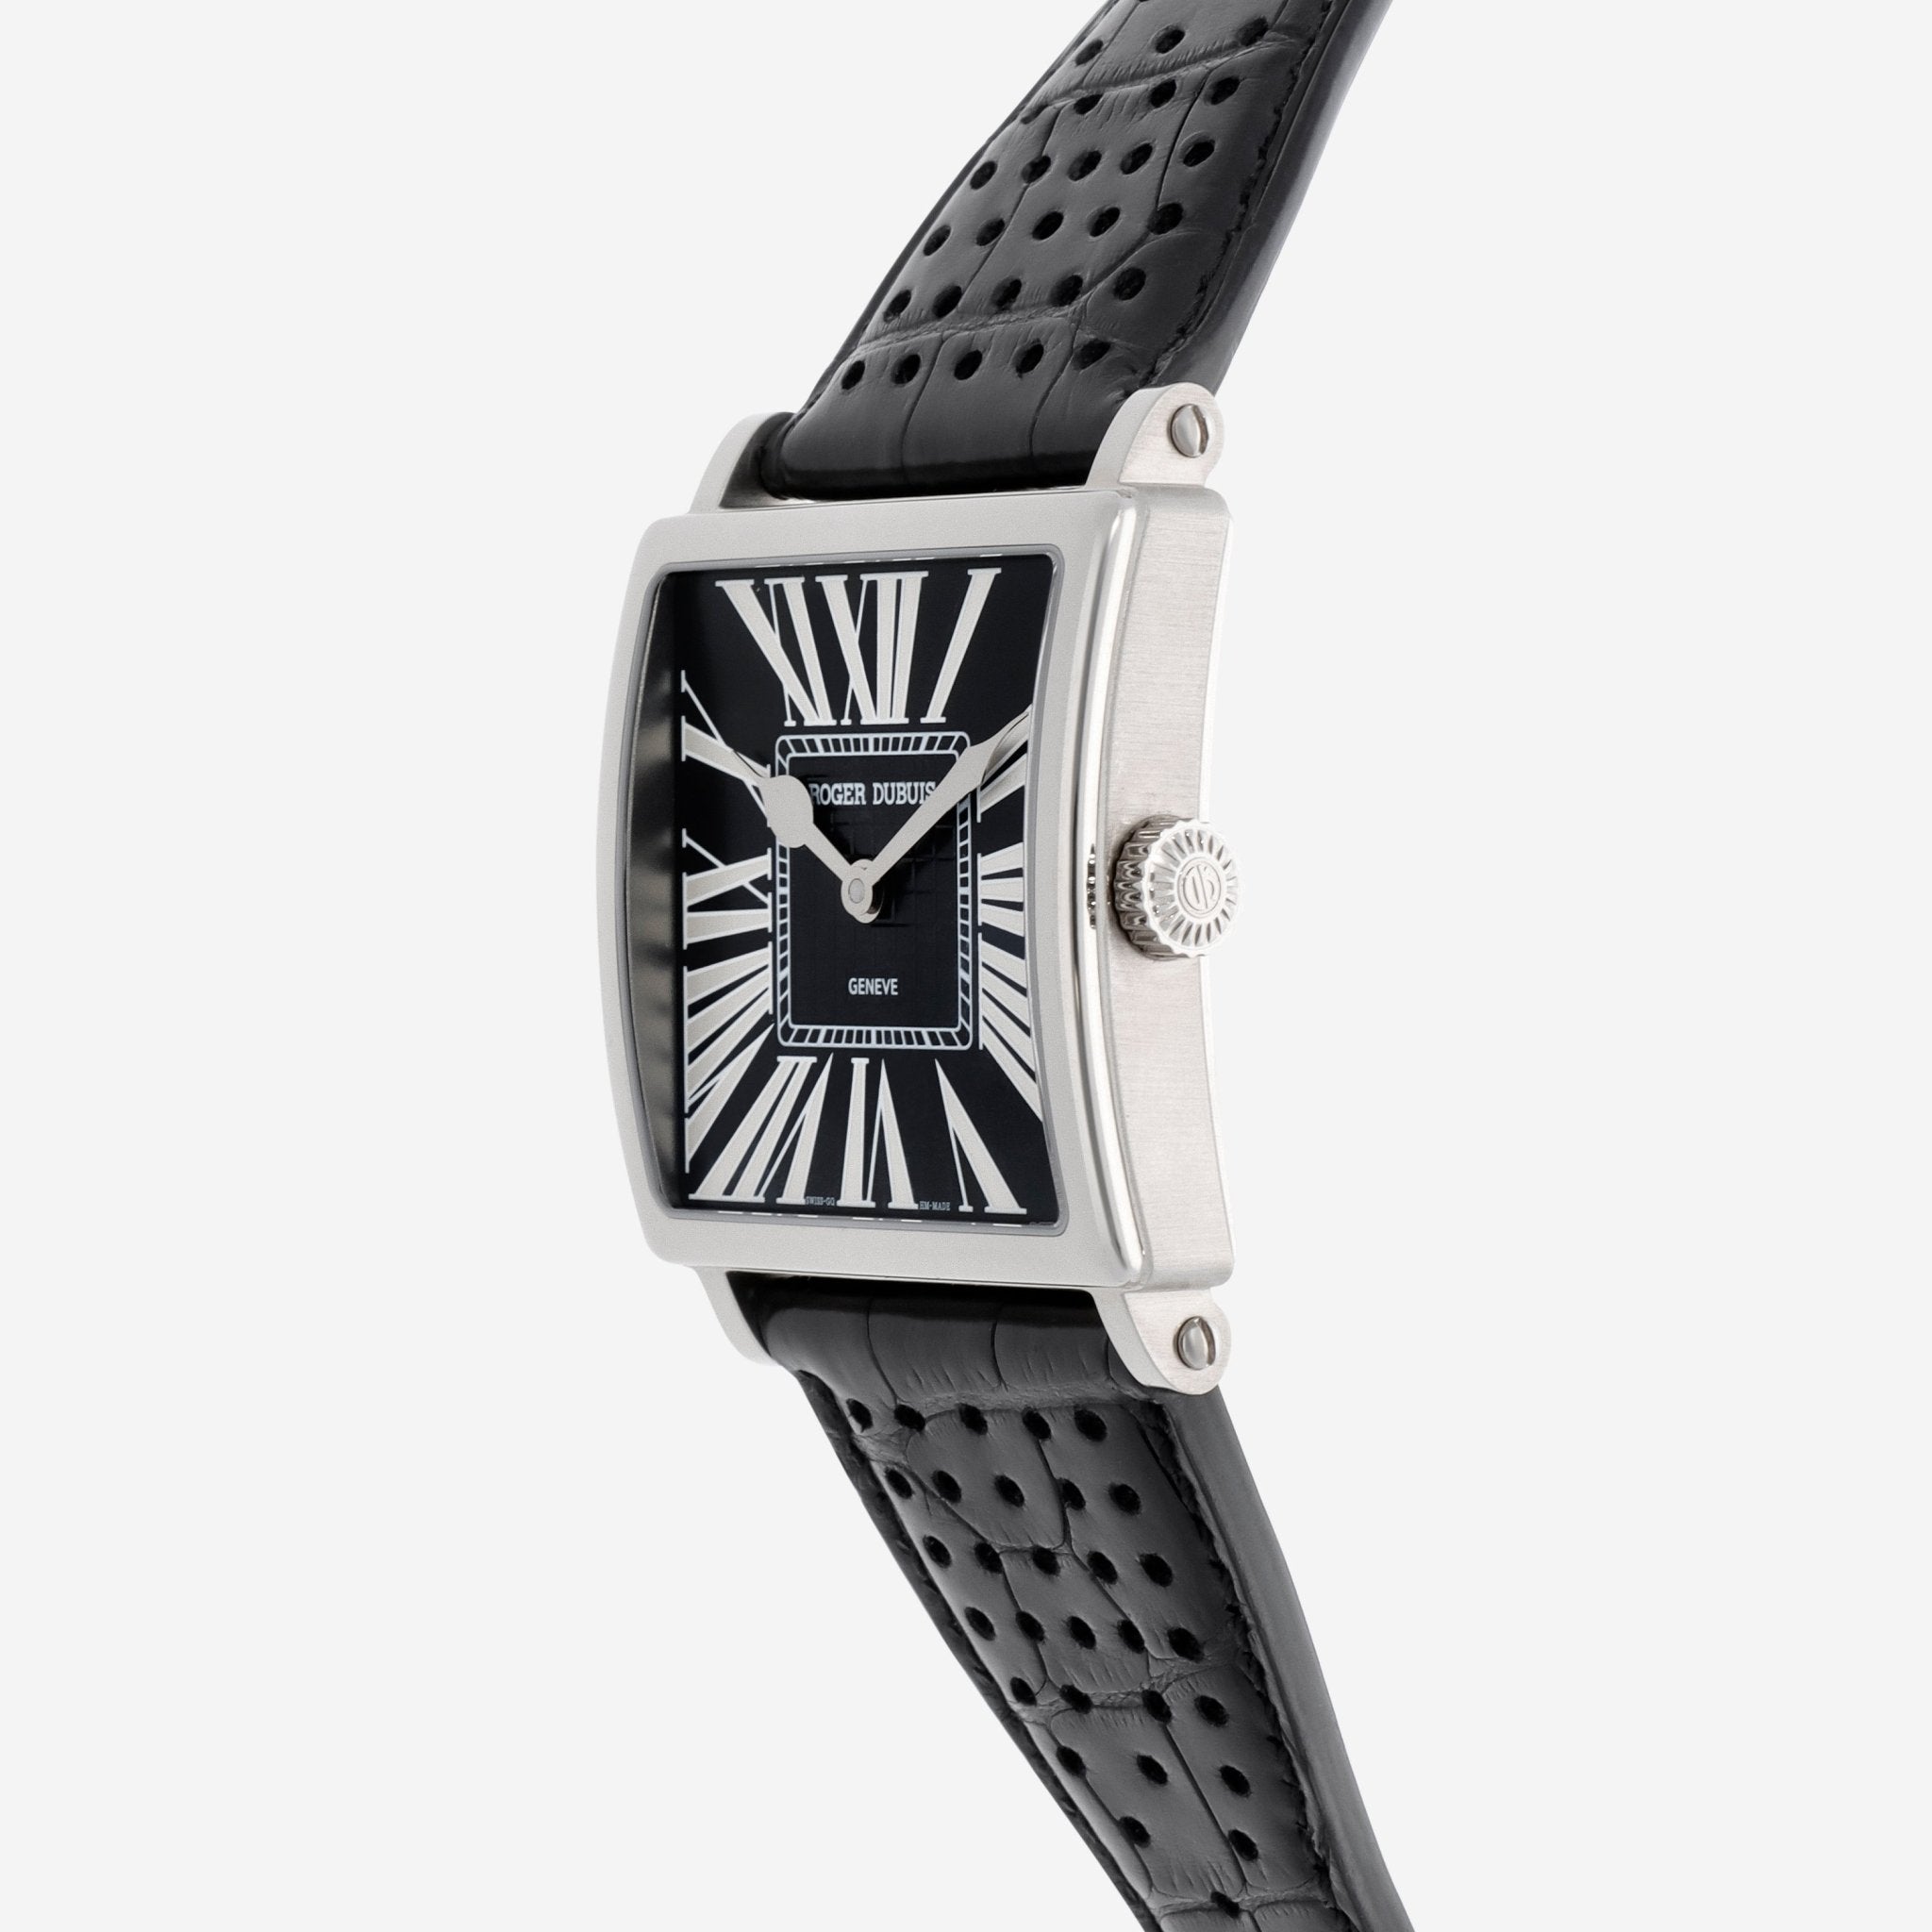 Roger Dubuis Golden Square 18K White Gold 40mm Automatic Watch G40140G99 - 71 - THE SOLIST - Roger Dubuis